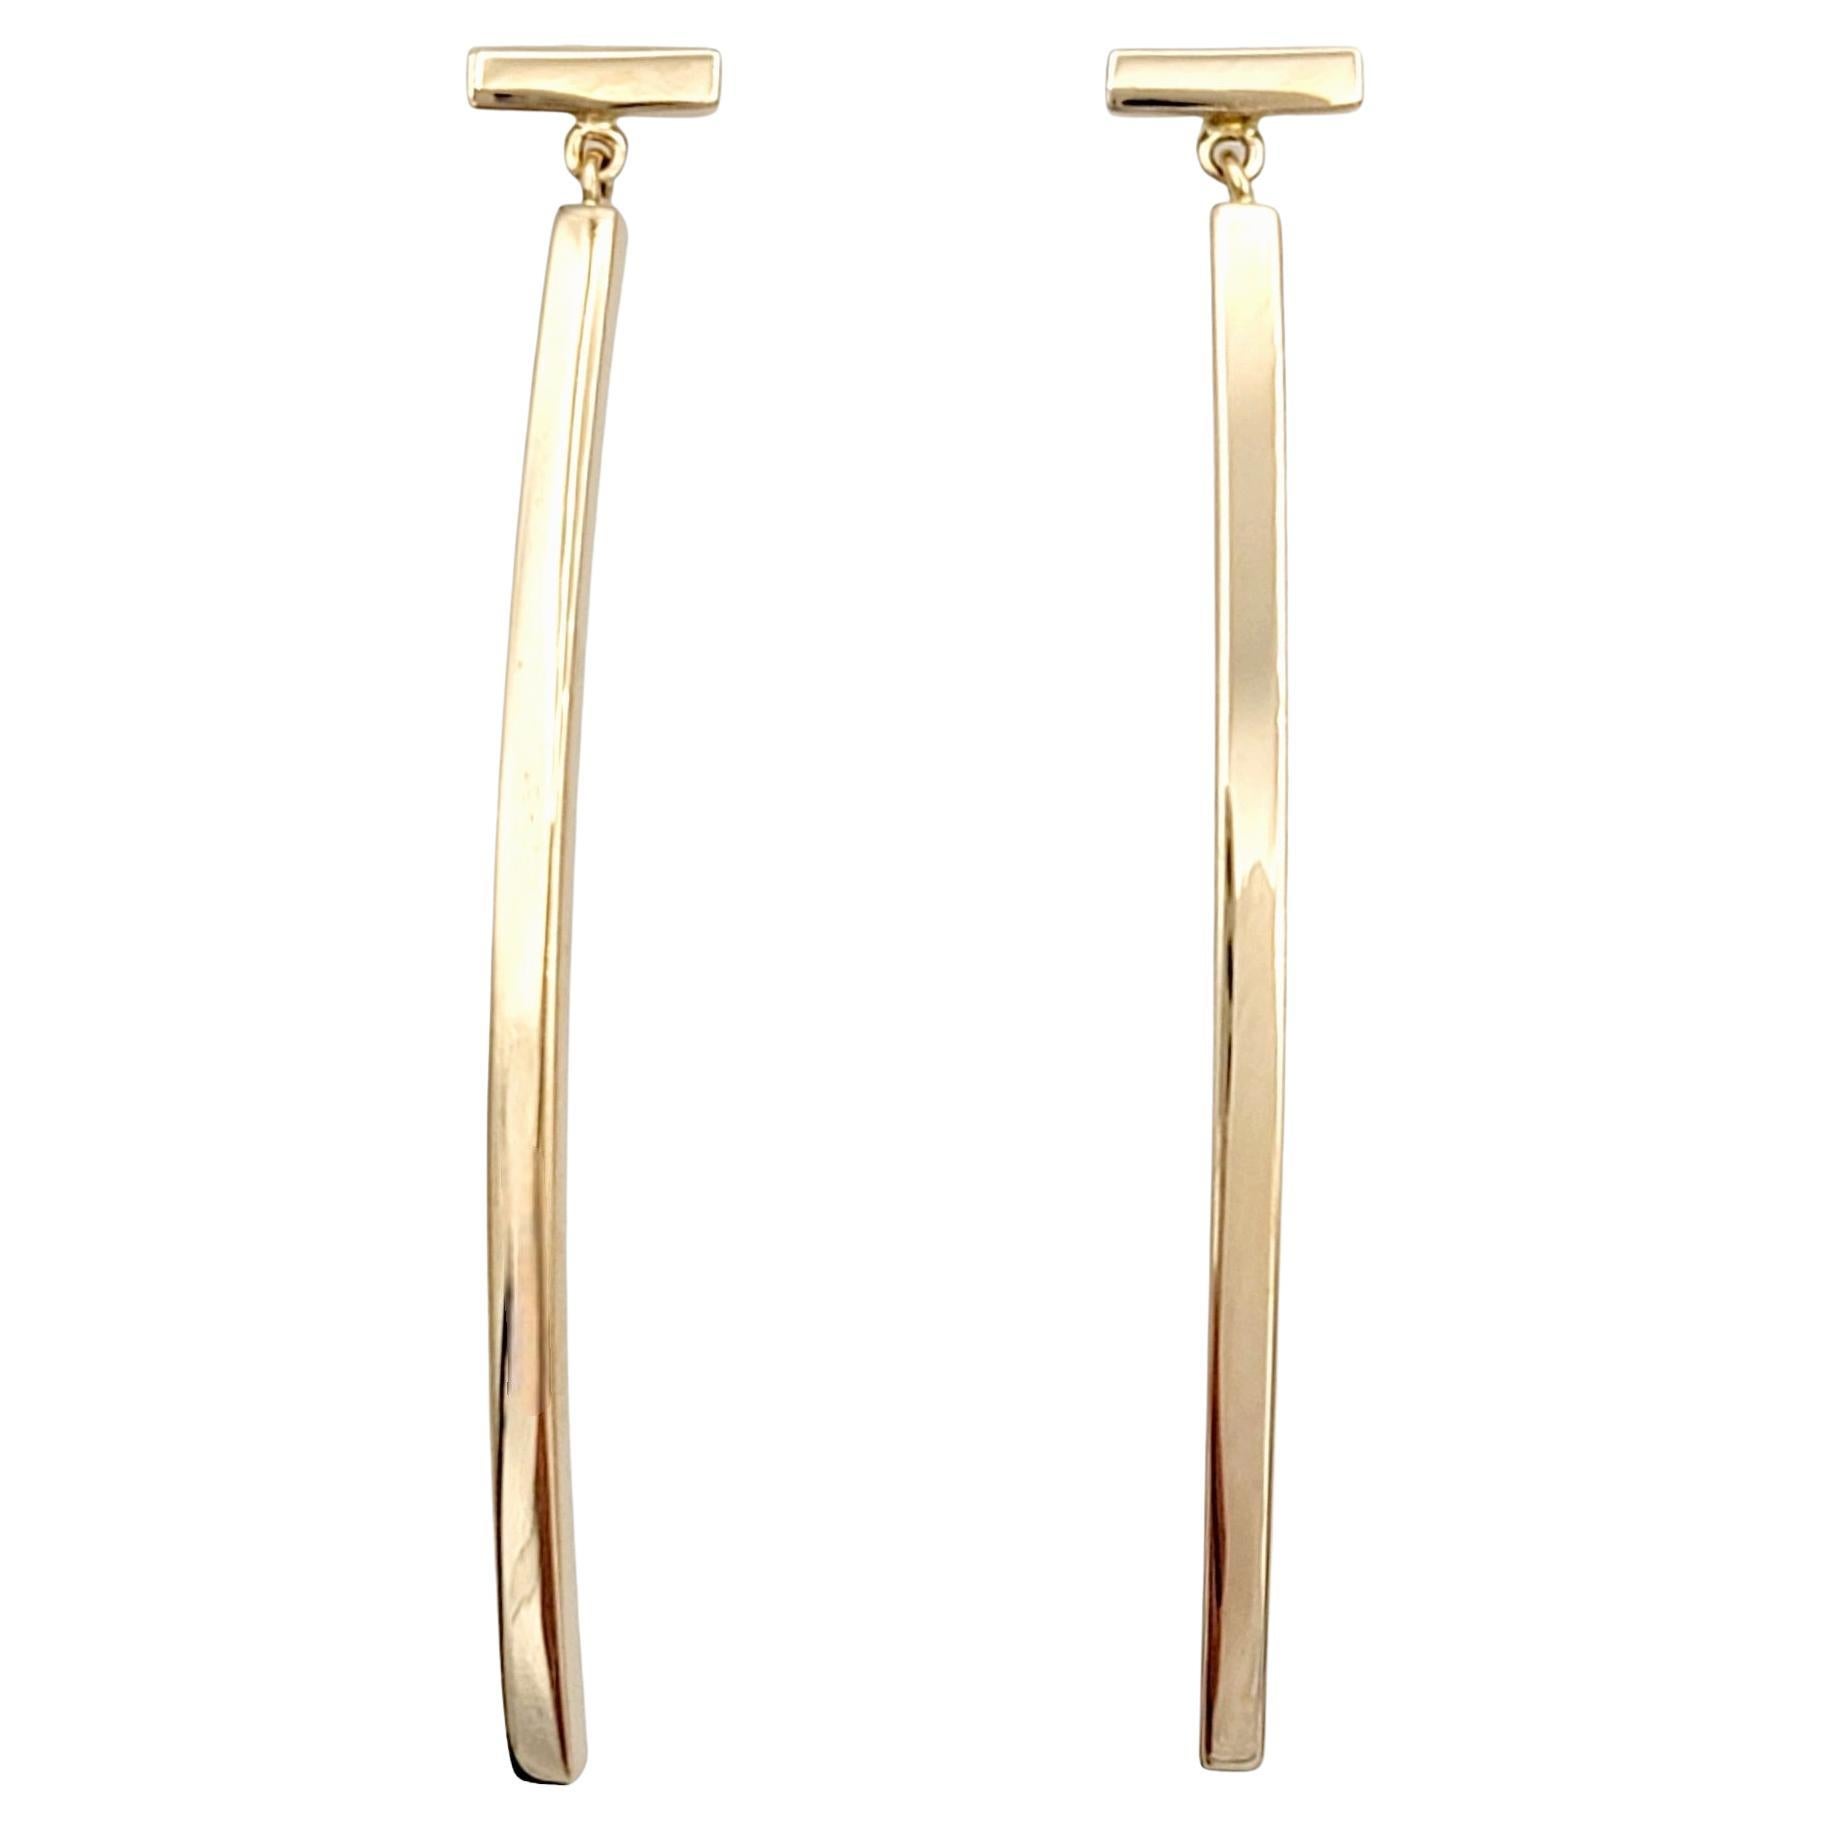 Introducing a stunning pair of Tiffany & Co. Tiffany 'T' bar earrings in polished rose gold.  Founded in 1837 in New York City, Tiffany & Co. is one of the world's most storied luxury design houses recognized globally for its innovative jewelry